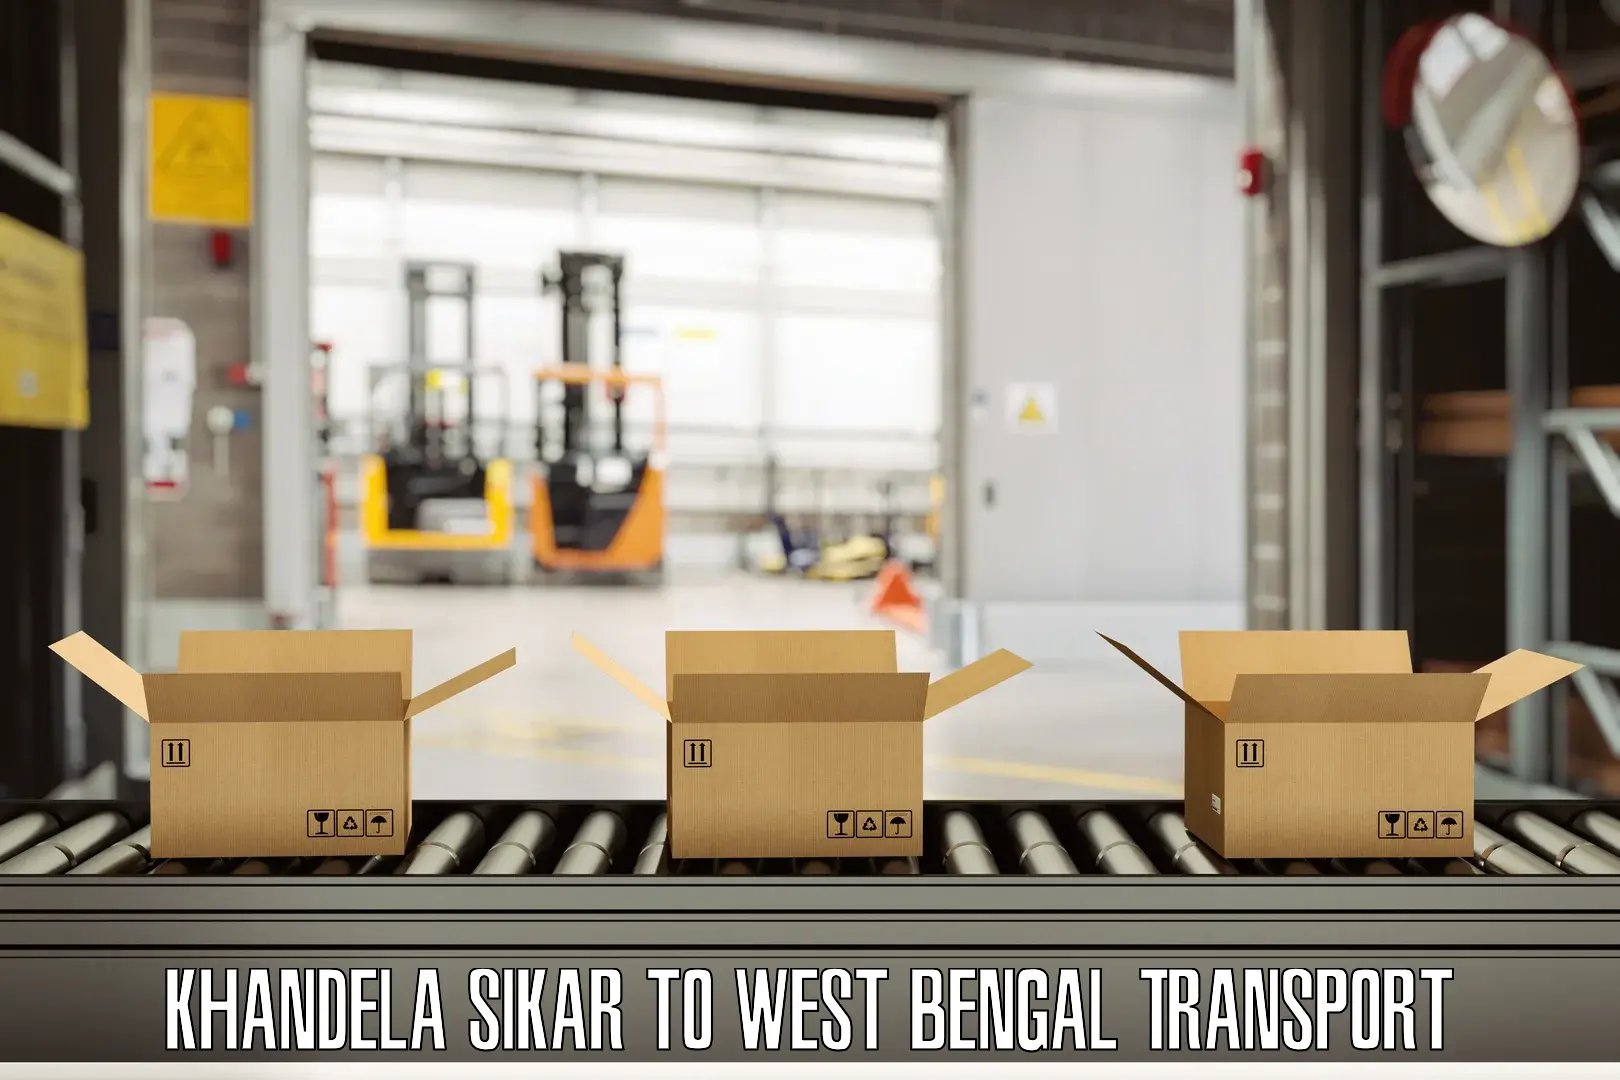 Truck transport companies in India in Khandela Sikar to Contai